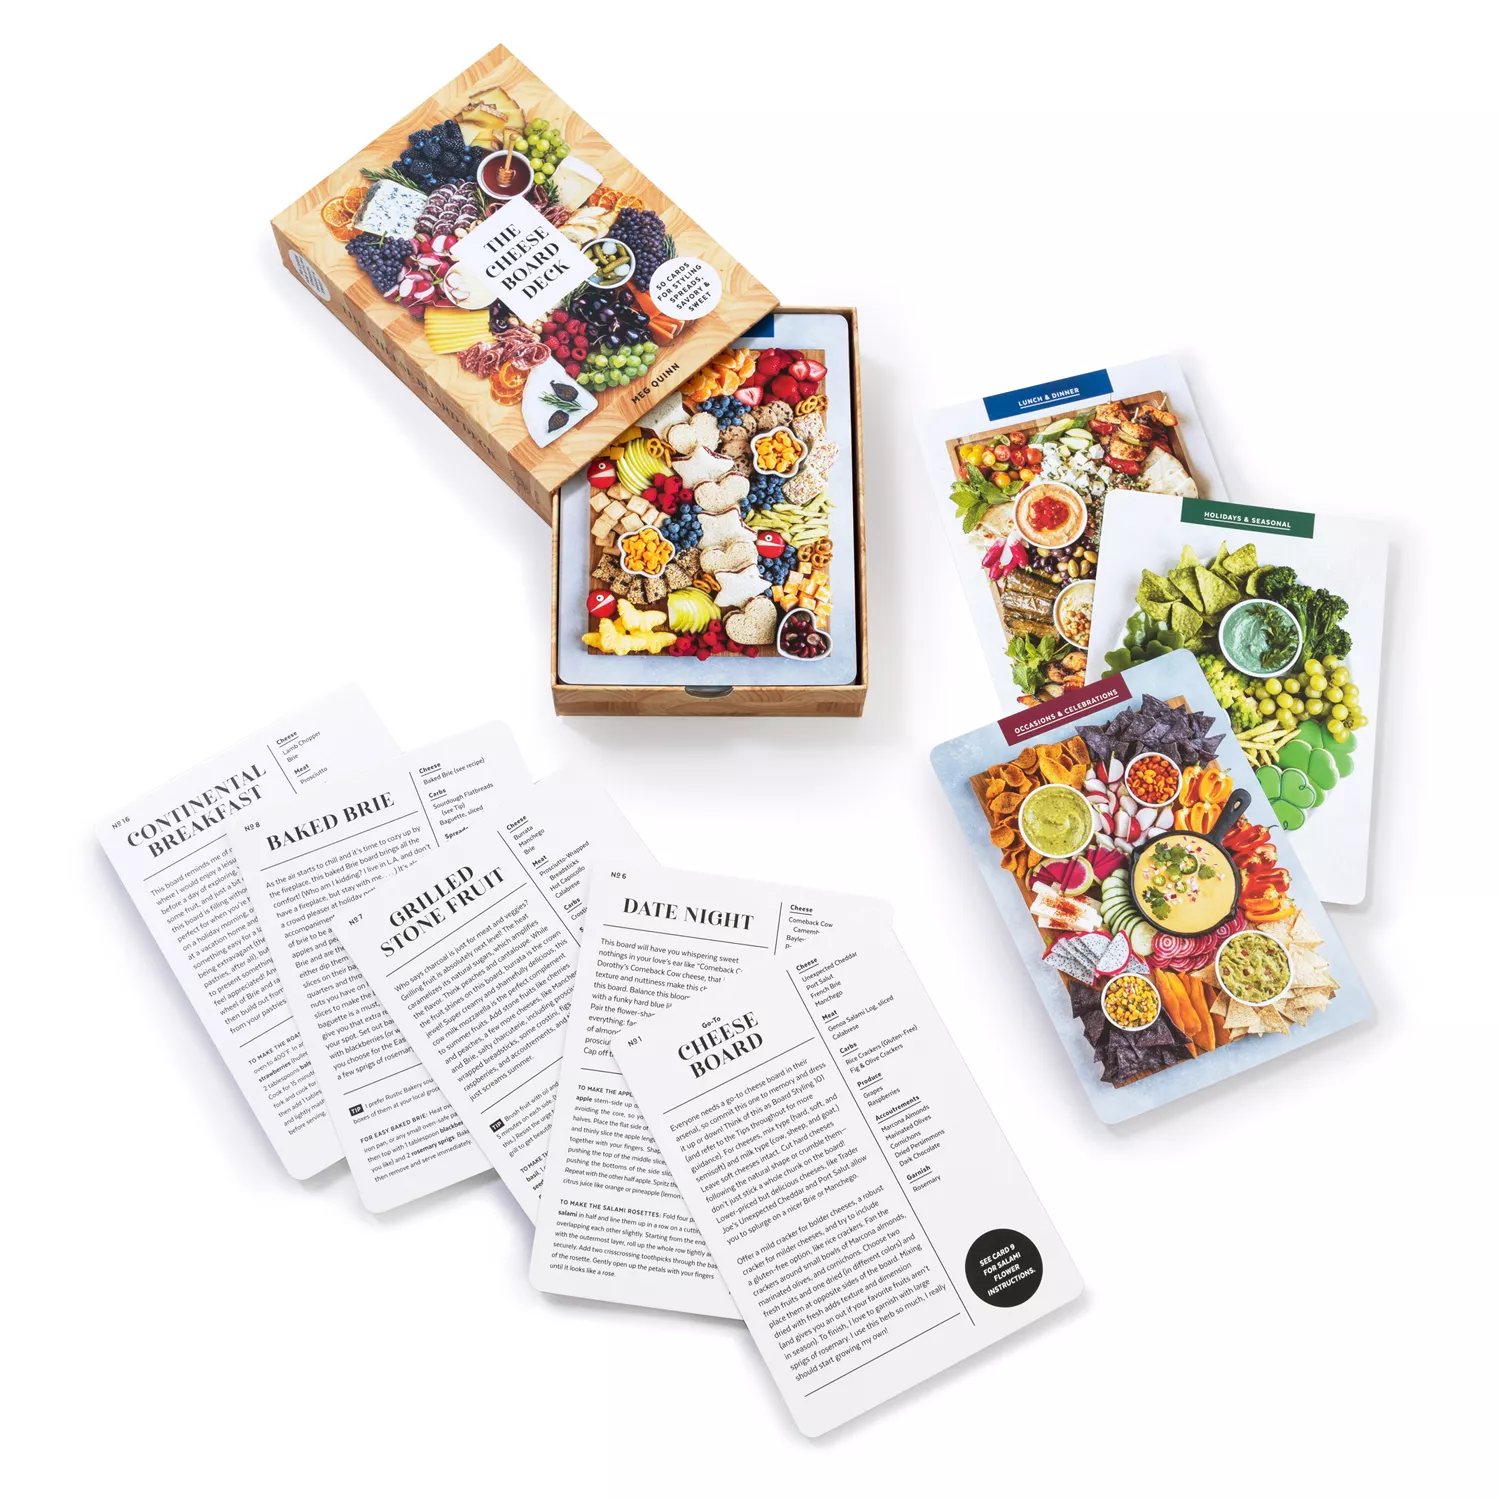 The Cheese Board Deck: 50 Cards for Styling Spreads, Savory and